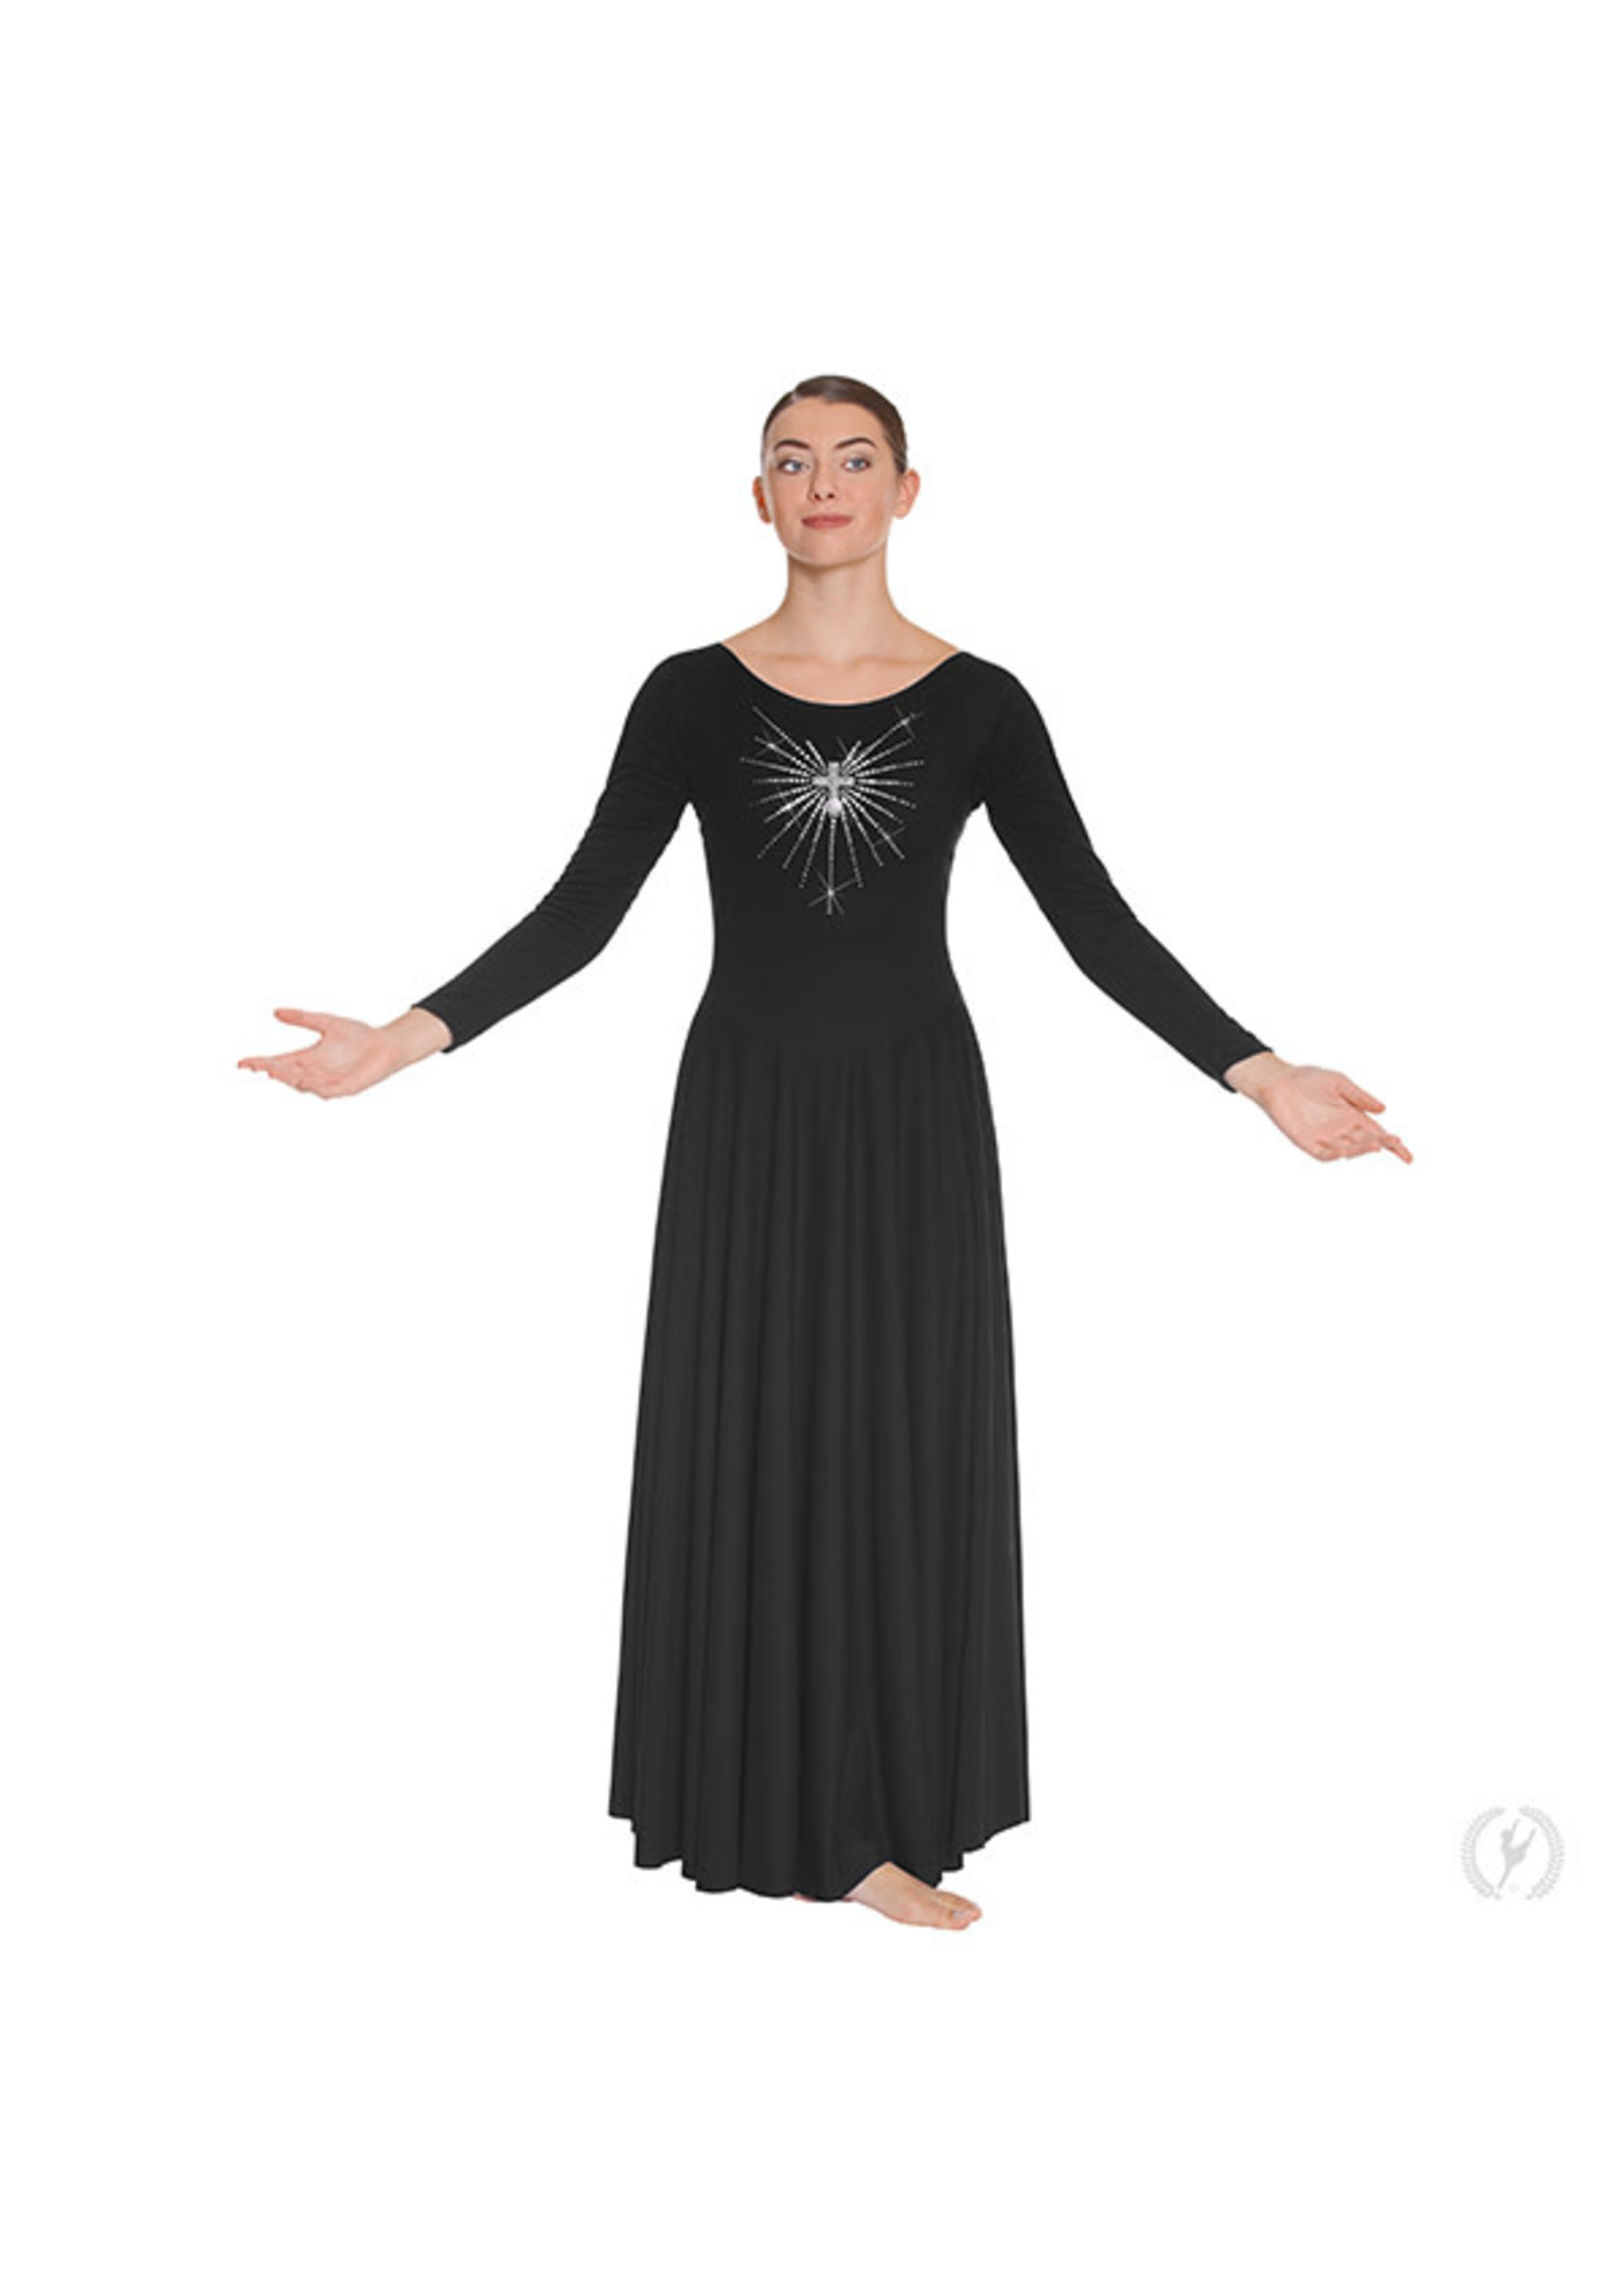 Front Lined Long Sleeve Dress with Rhinestone Radiant Cross Dress